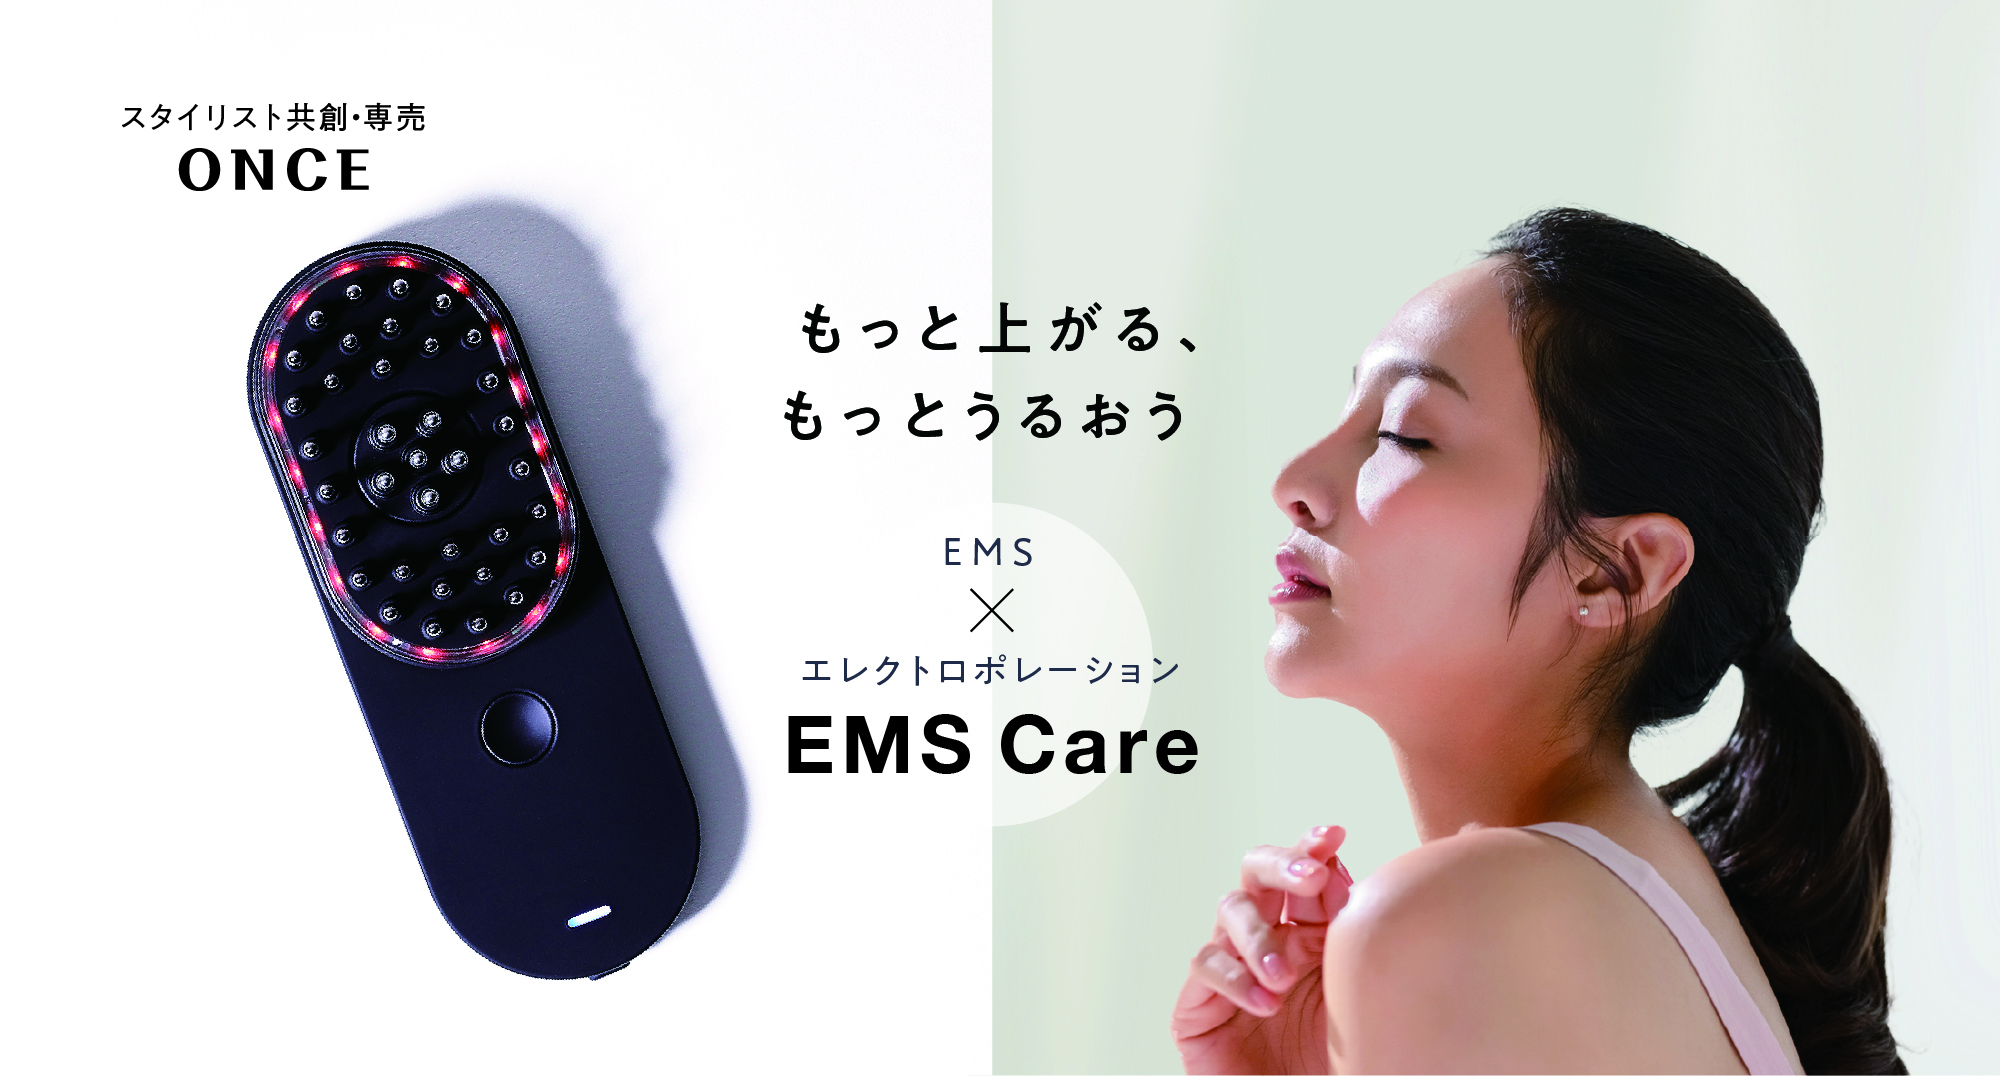 ONCE EMS Care 電気バリブラシ 美顔器 頭皮ケア リフトアップ 育毛